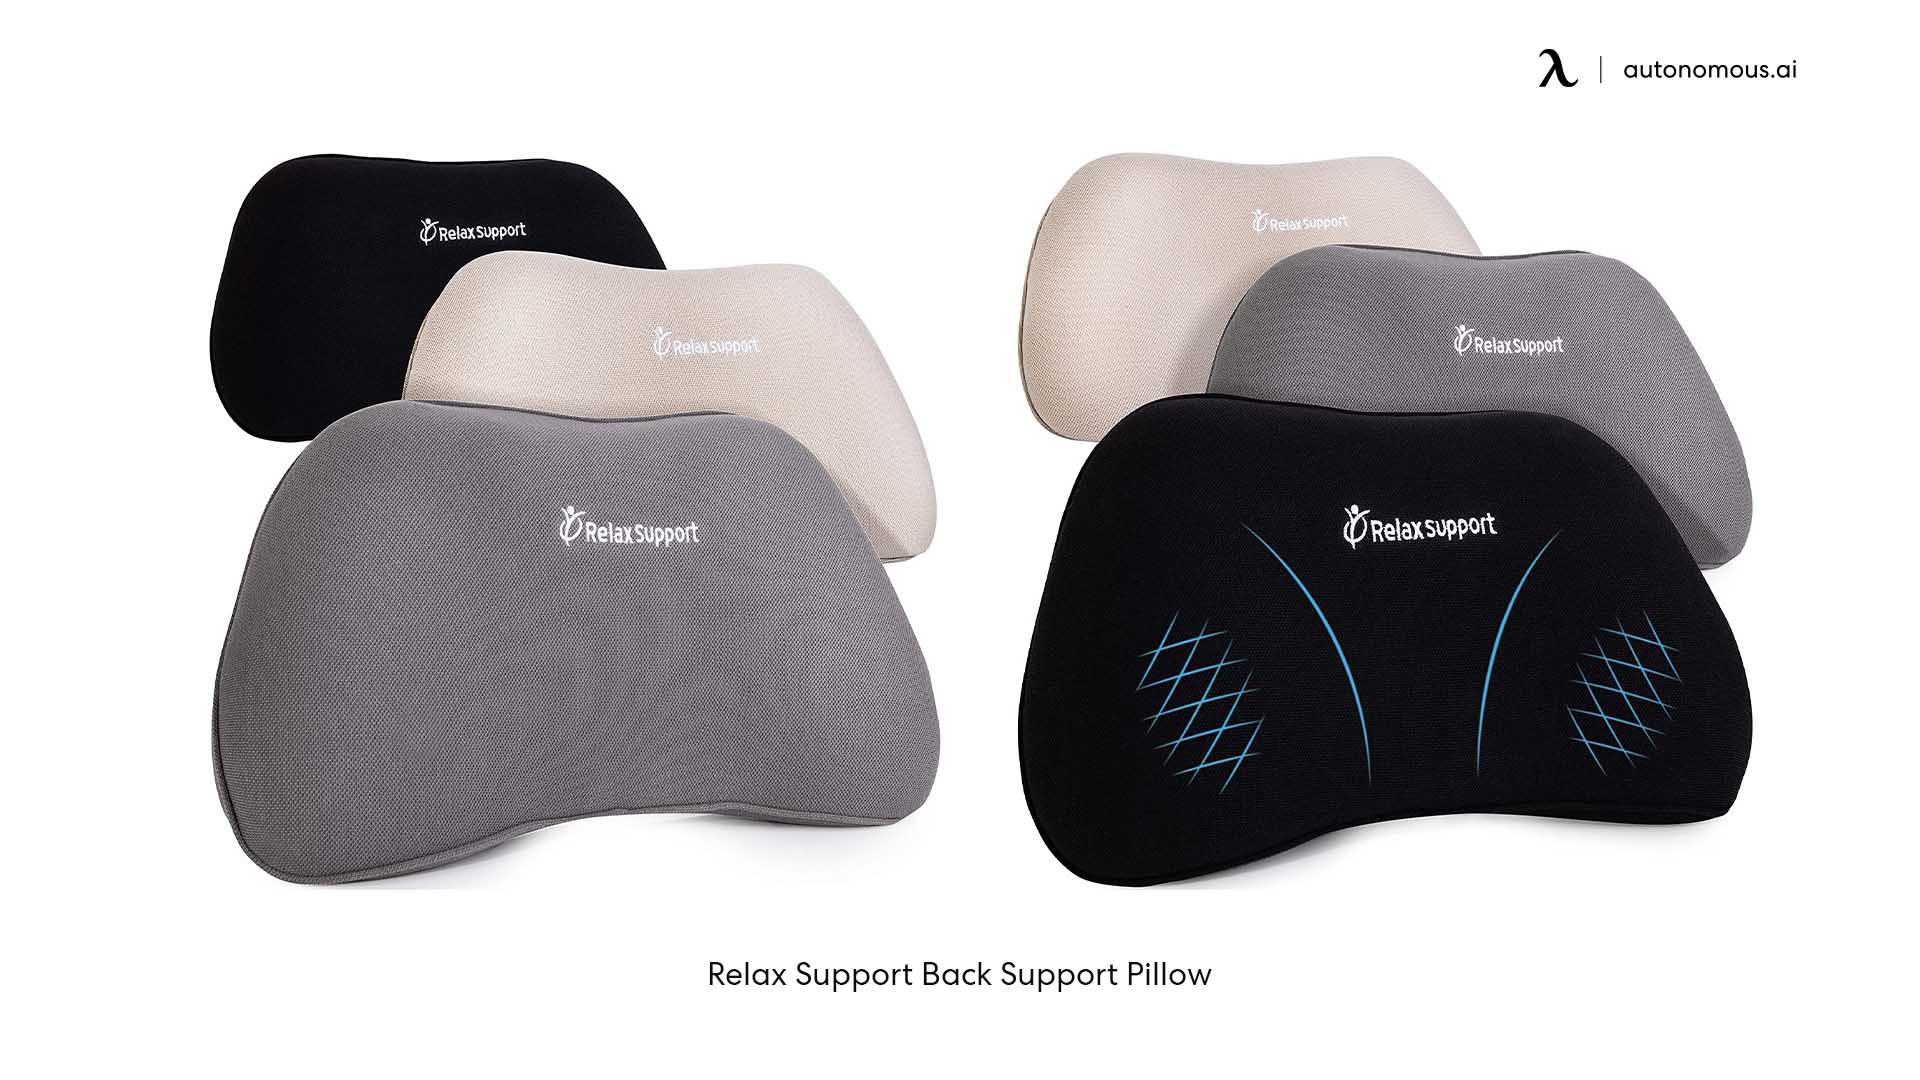 Relax Support Back Support Pillow